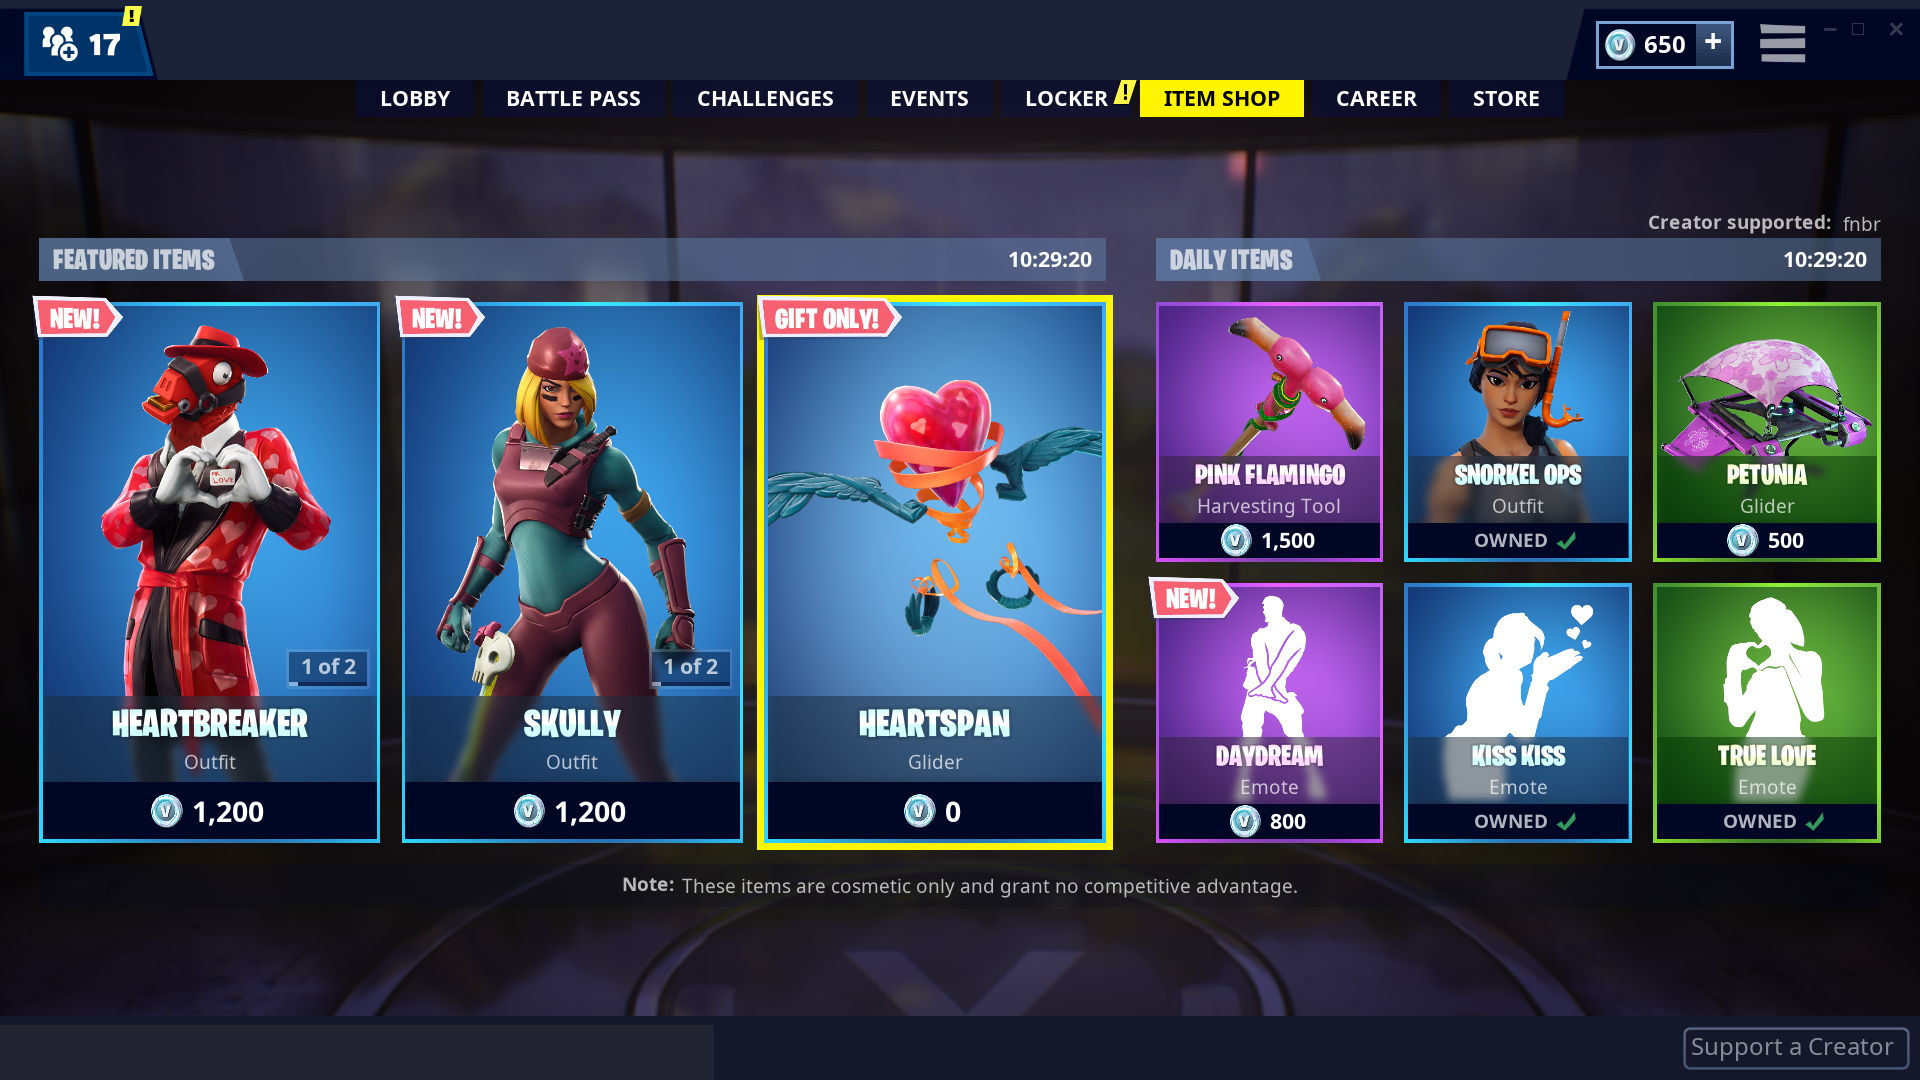 head to the item shop tab and select the heartspan panel - fortnite item generator